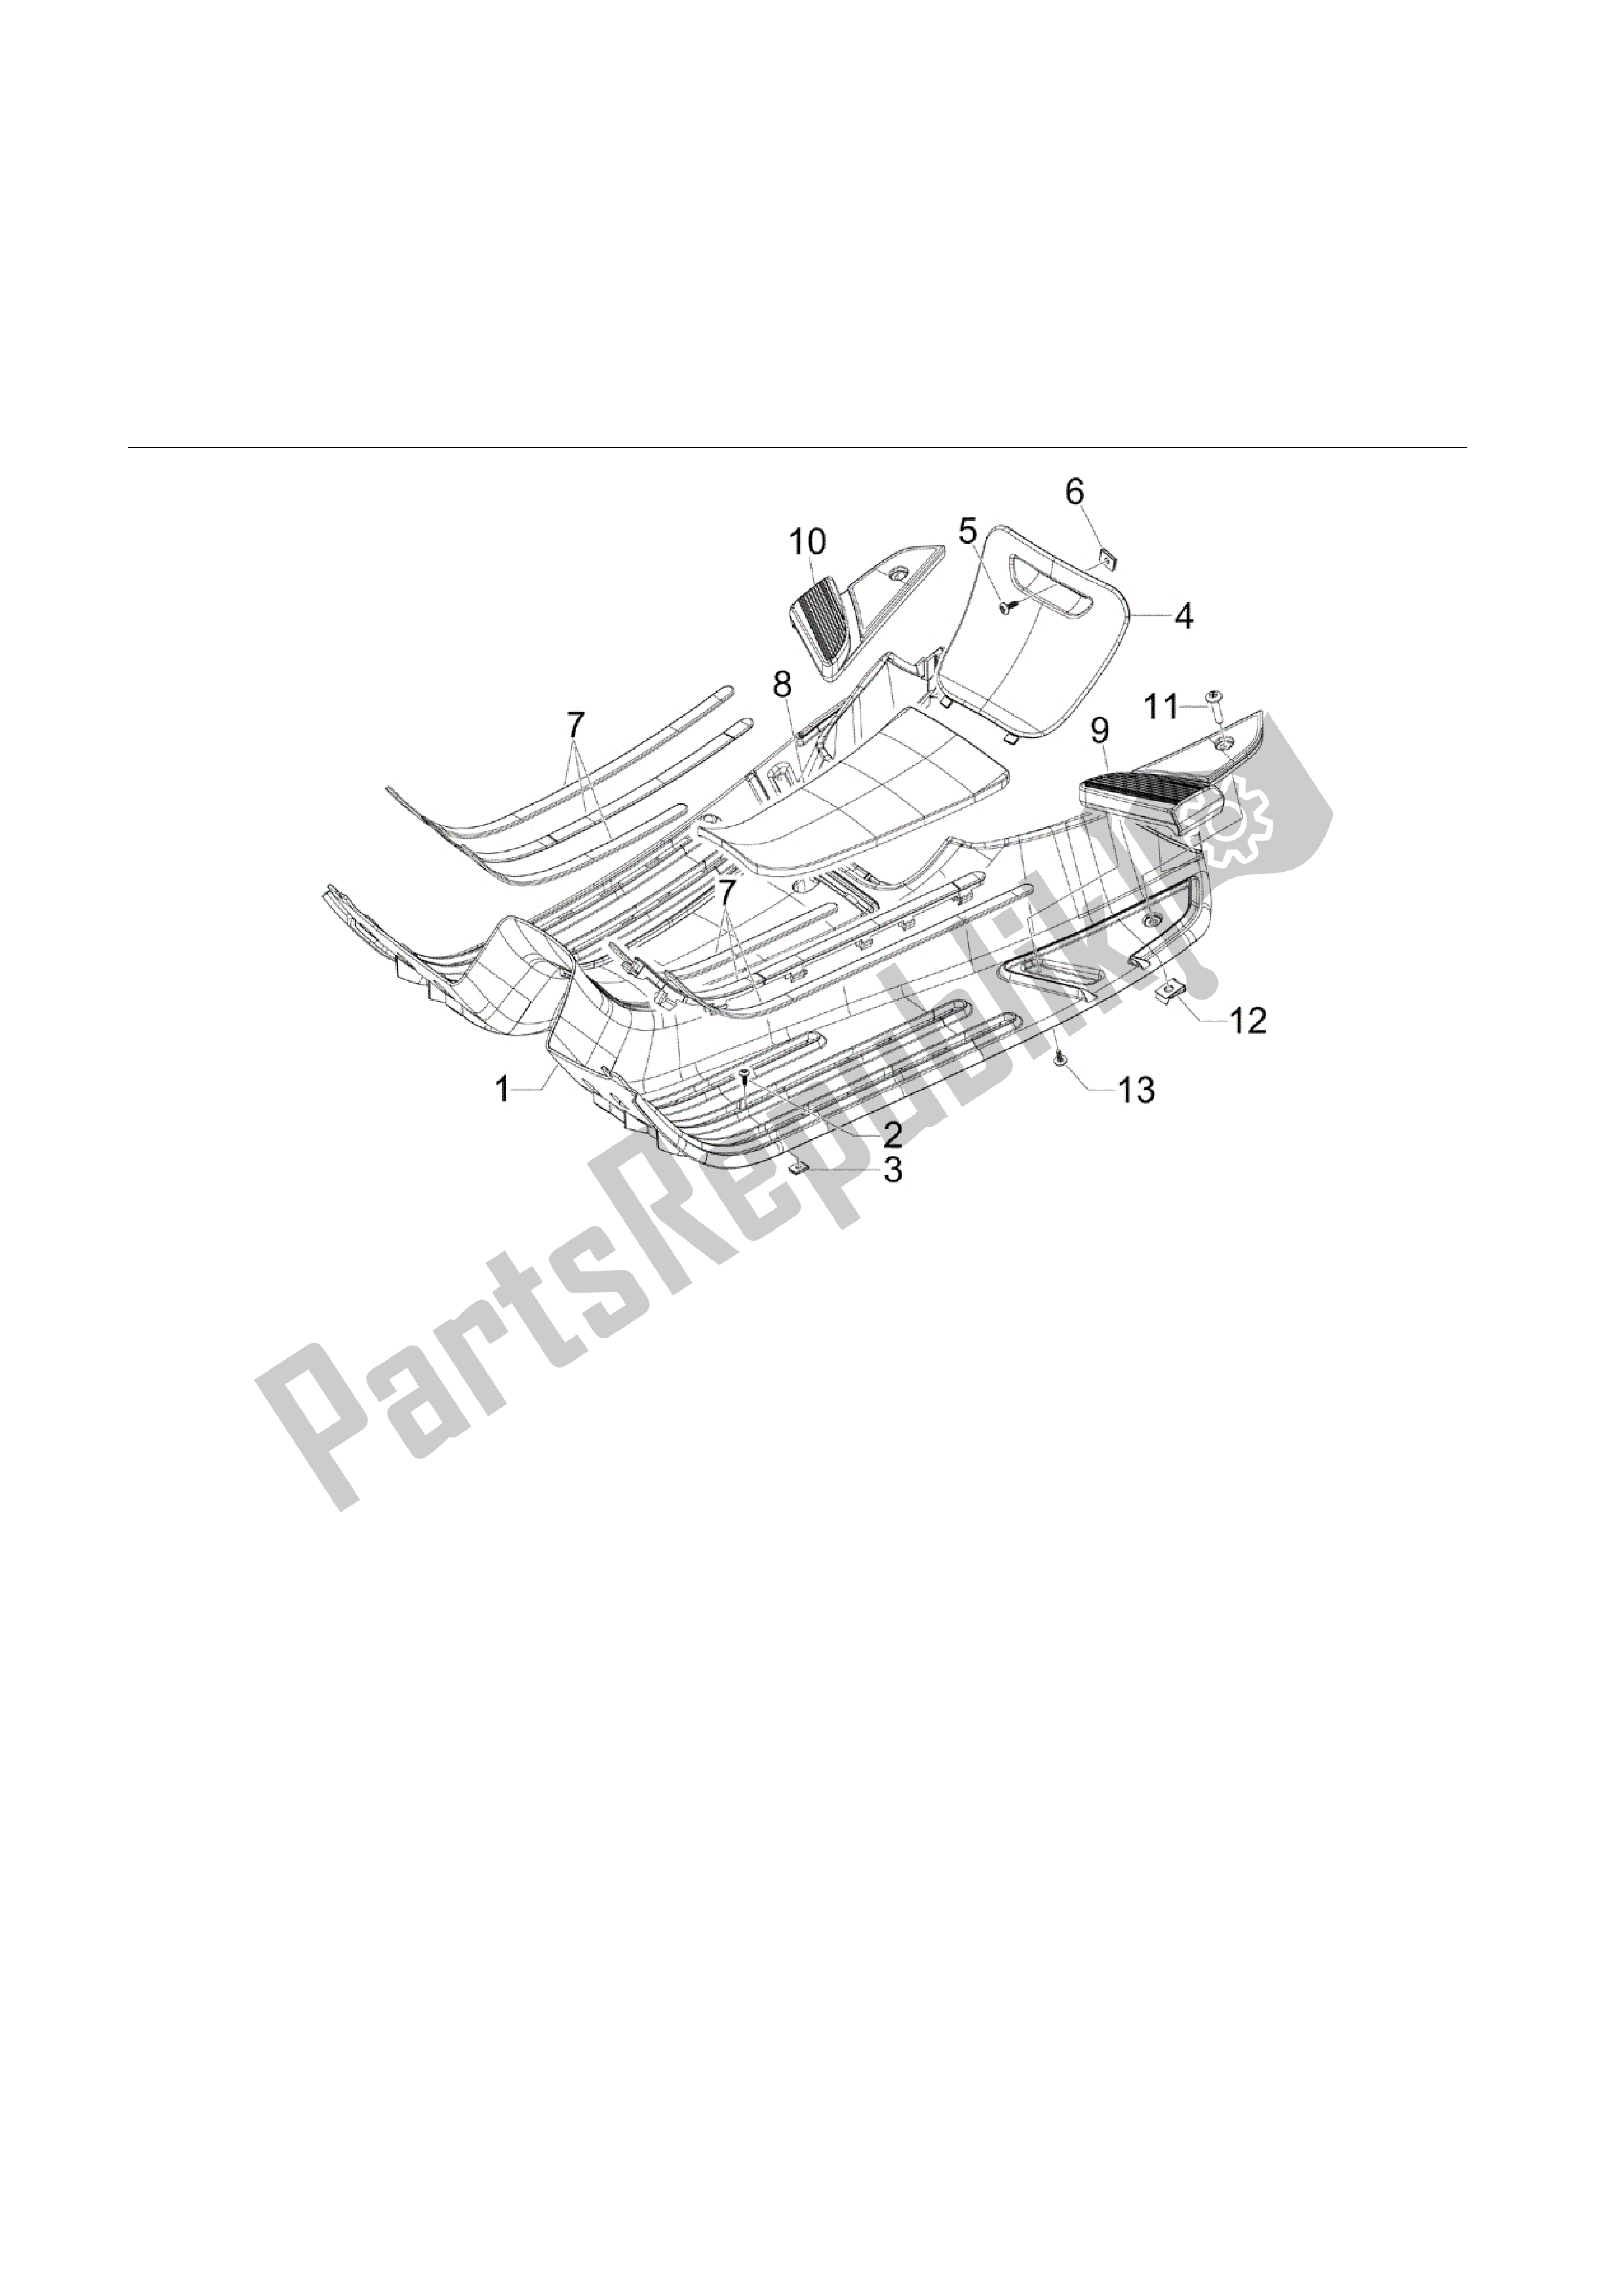 All parts for the Cubierta Central - Estribos of the Vespa S 125 2007 - 2008